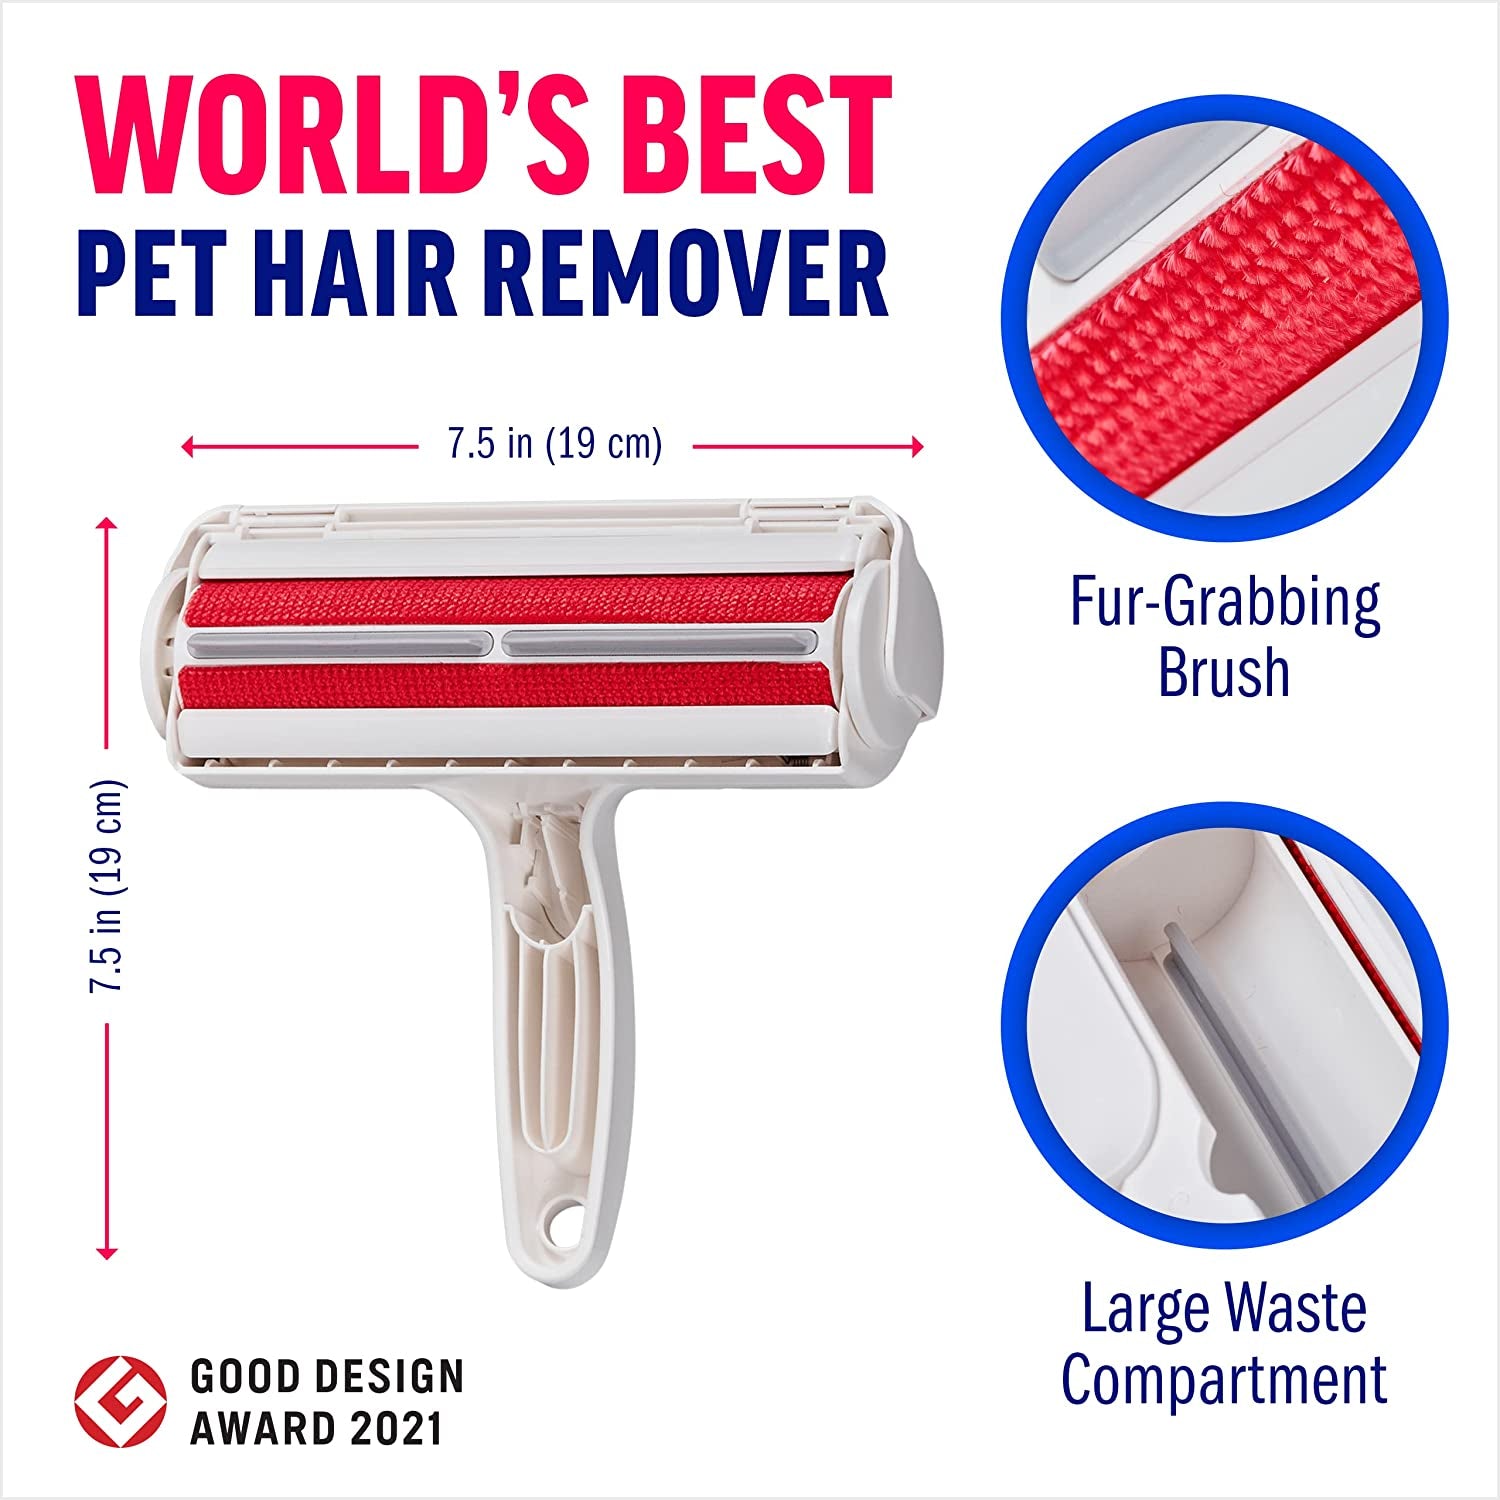 Pet Hair Remover - Reusable Cat and Dog Hair Remover for Furniture, Couch, Carpet, Car Seats or Bedding - Portable, Multi-Surface Lint Roller and Fur Removal Tool